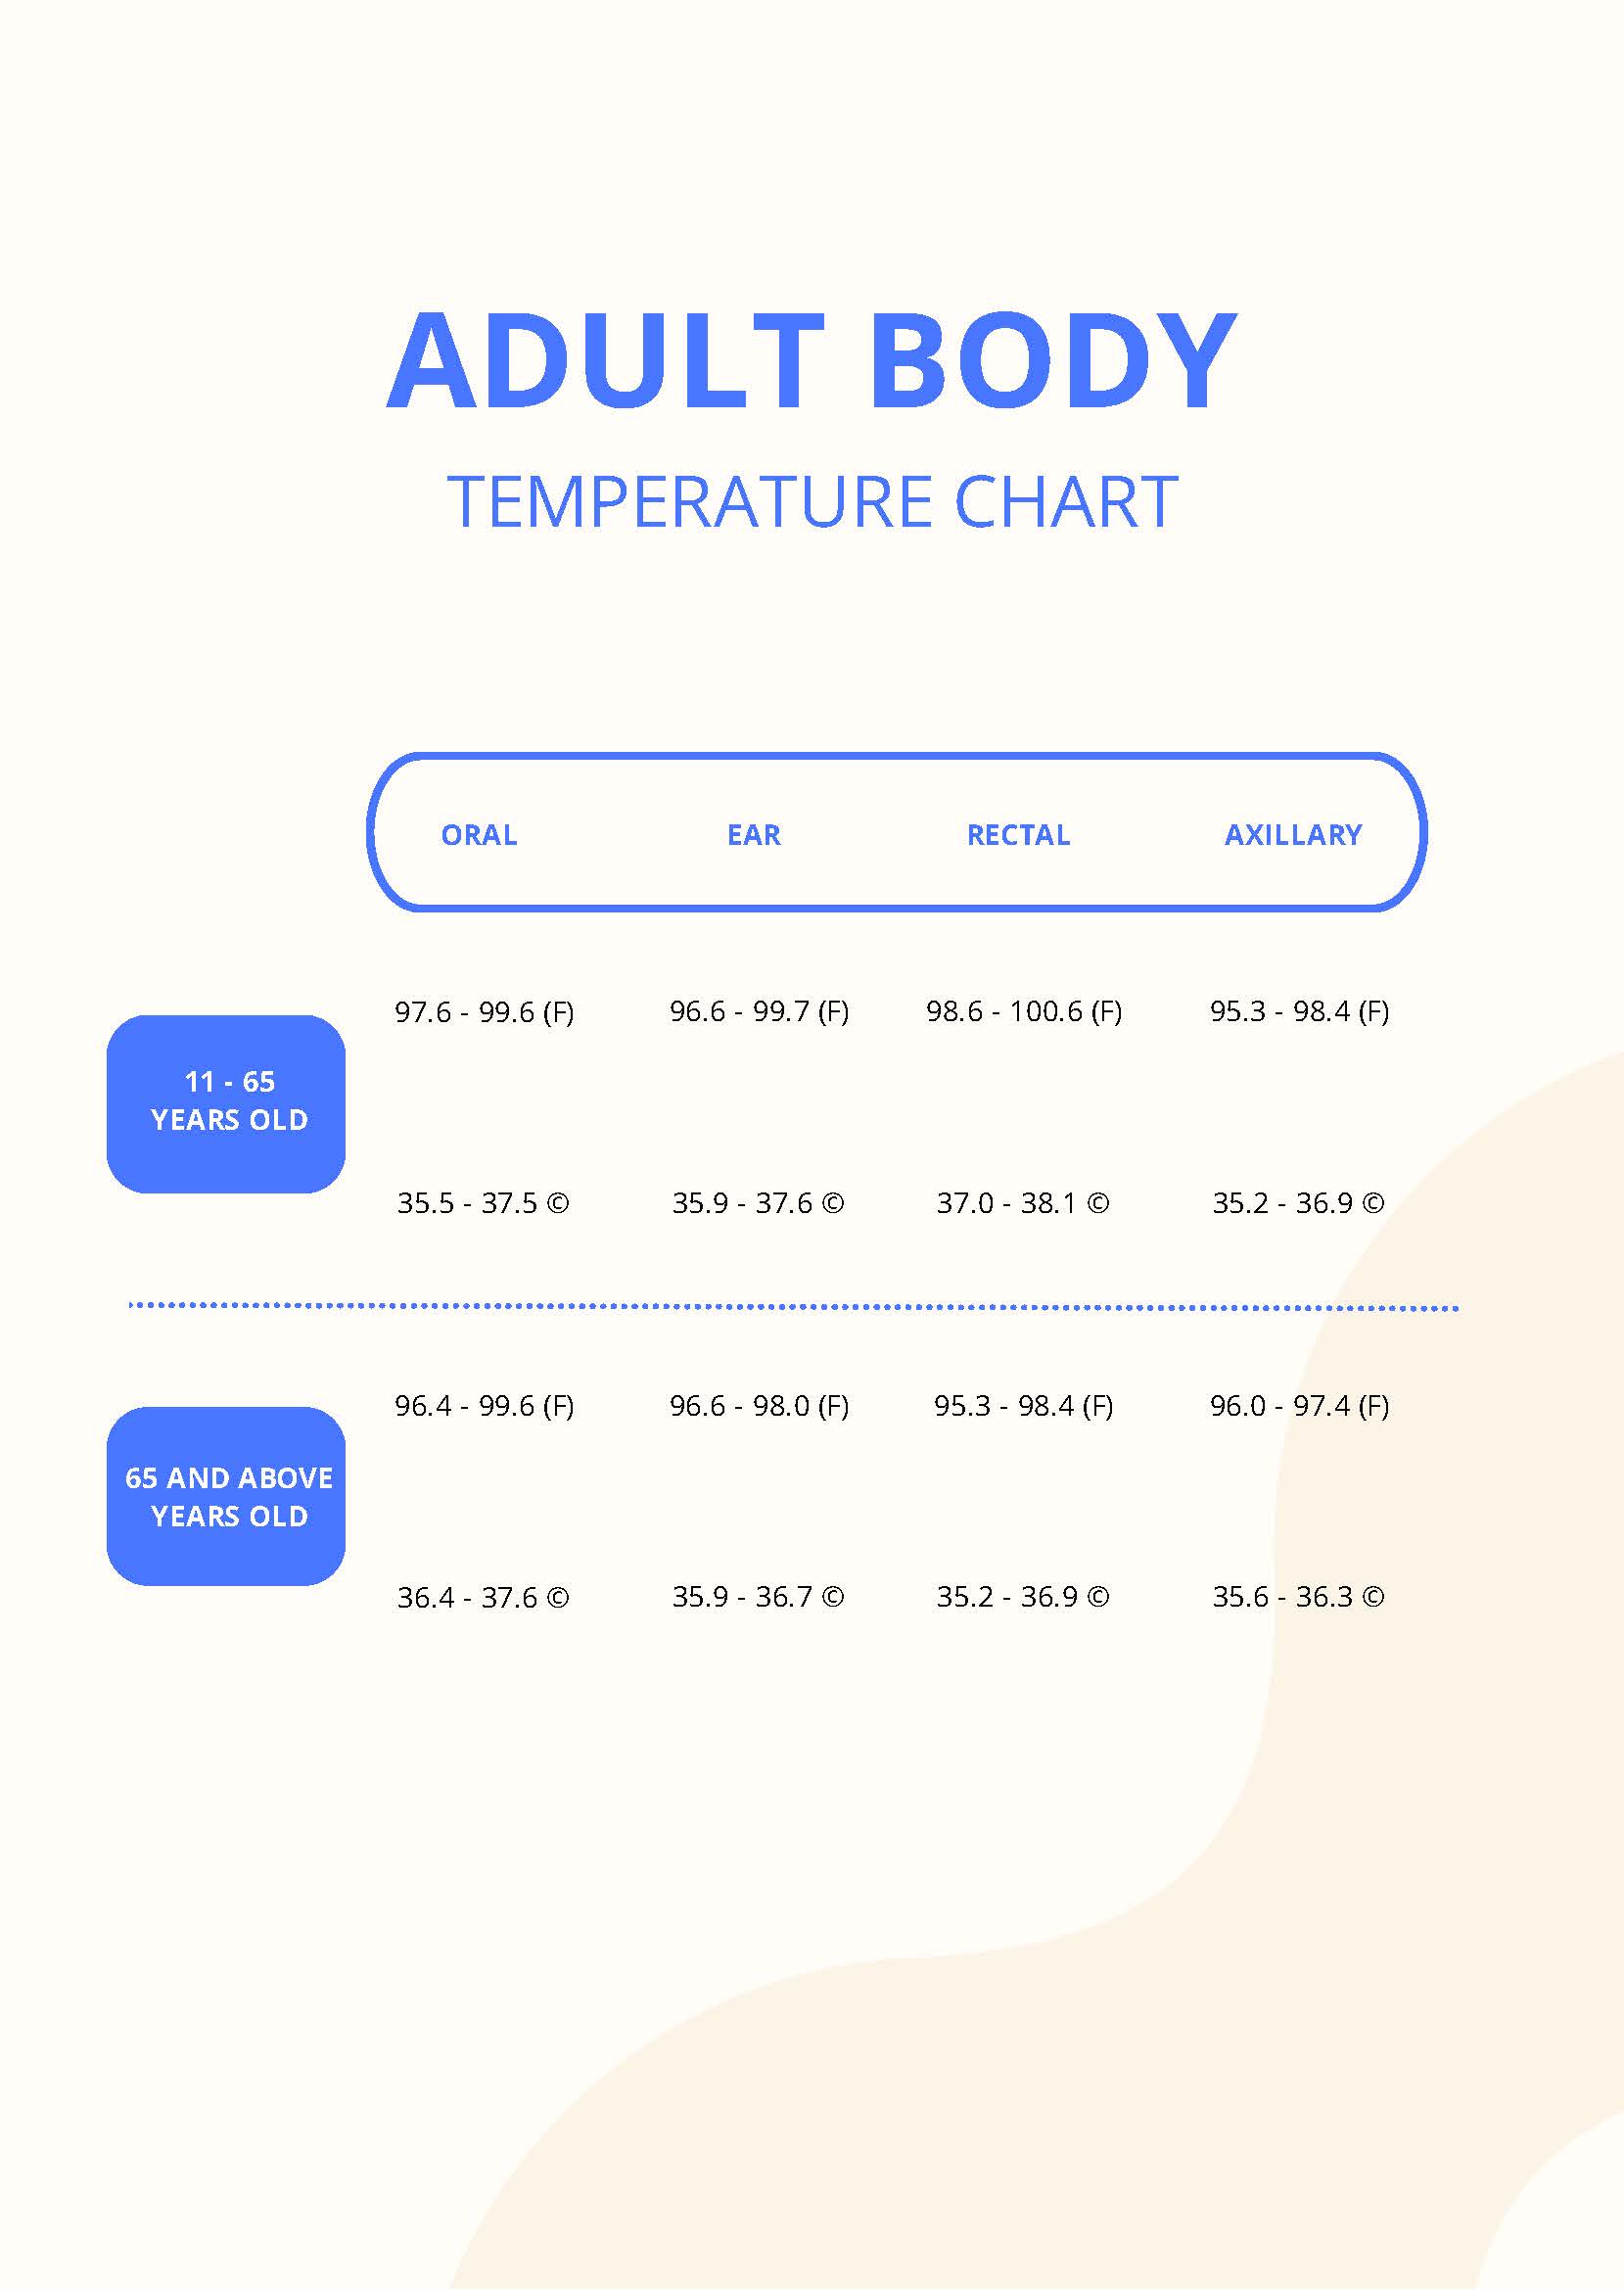 Adult Body Temperature Chart in PDF